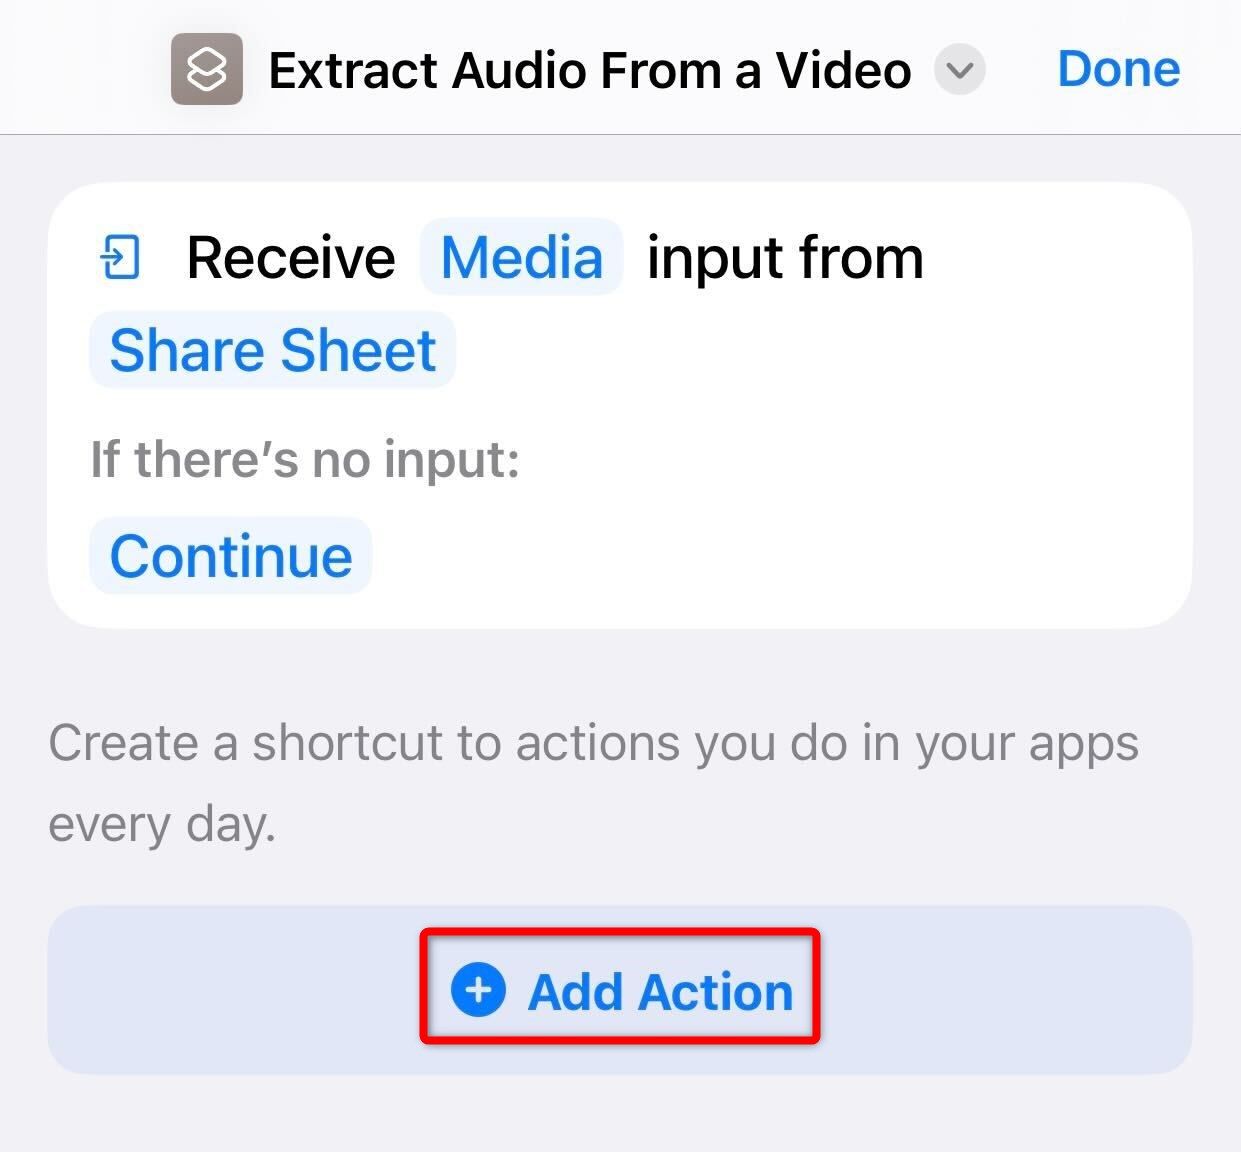 Tapping on 'Add Action' to add an action for the shortcut on iPhone.